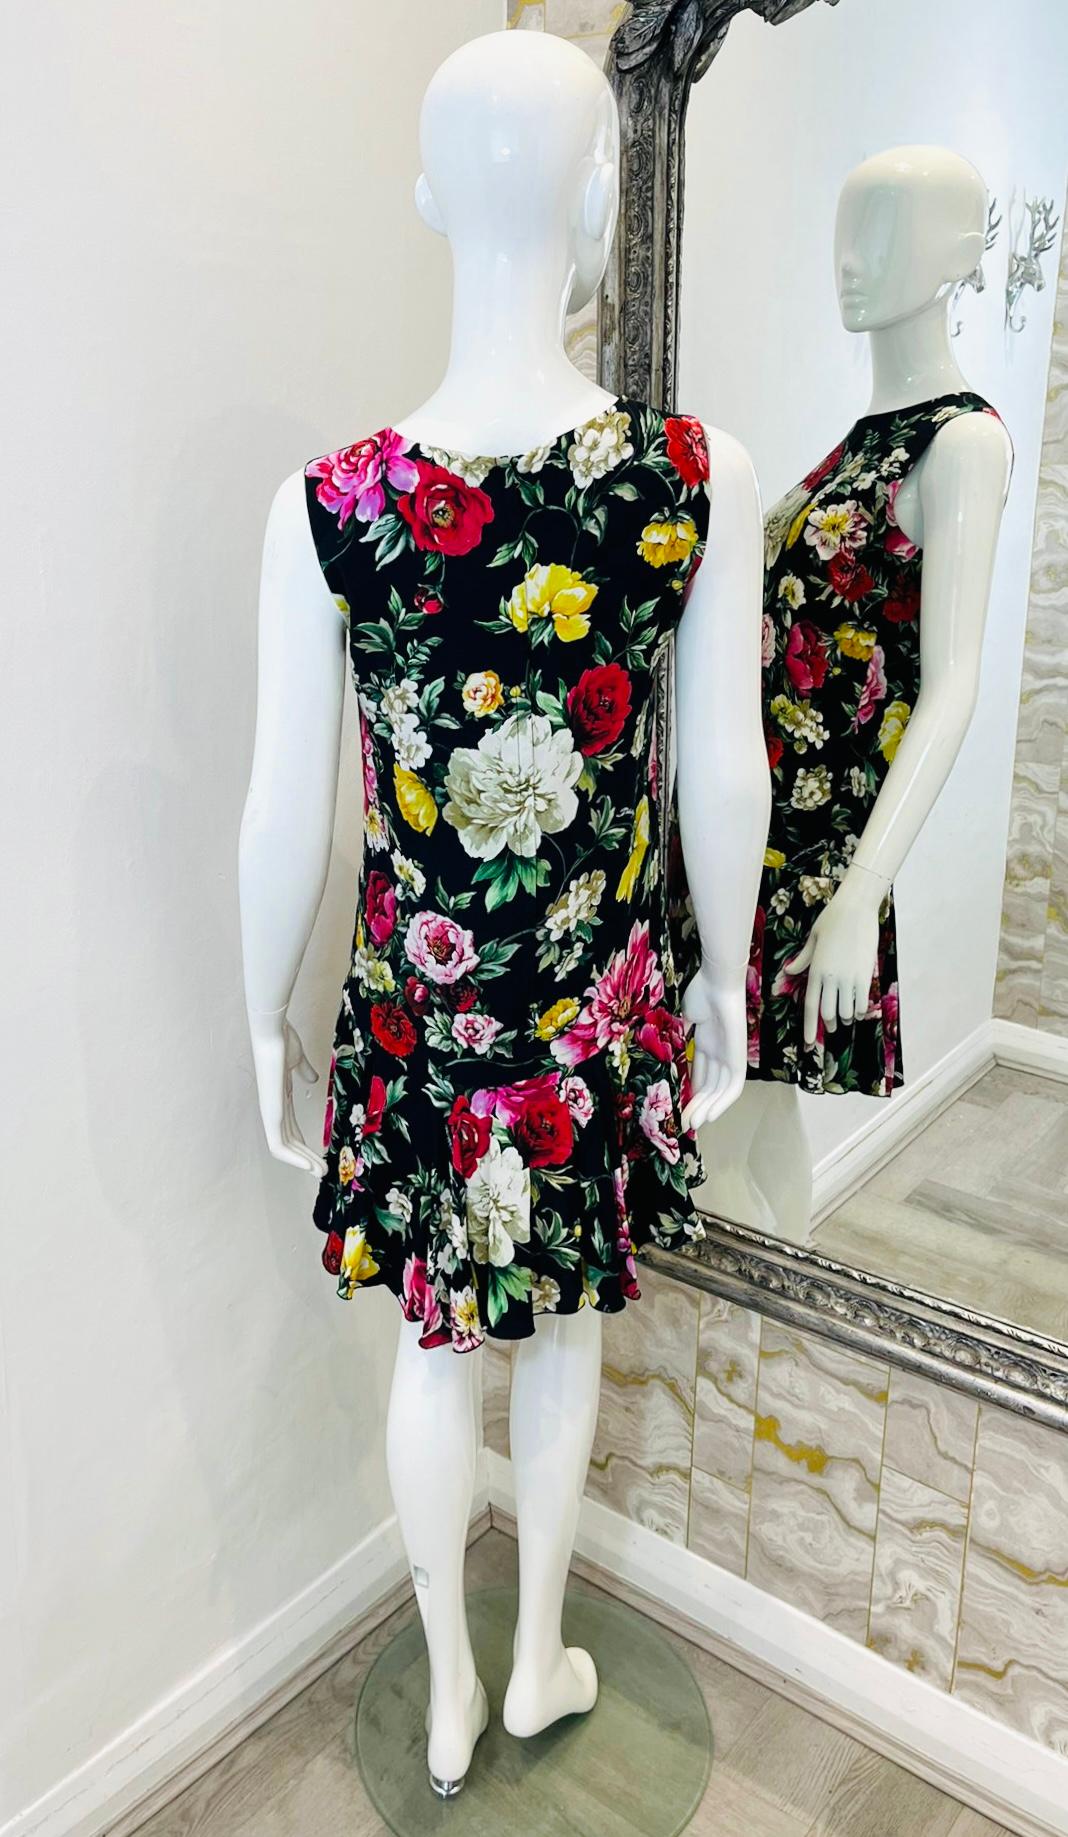 Dolce & Gabbana Floral A-Line Dress In Excellent Condition For Sale In London, GB